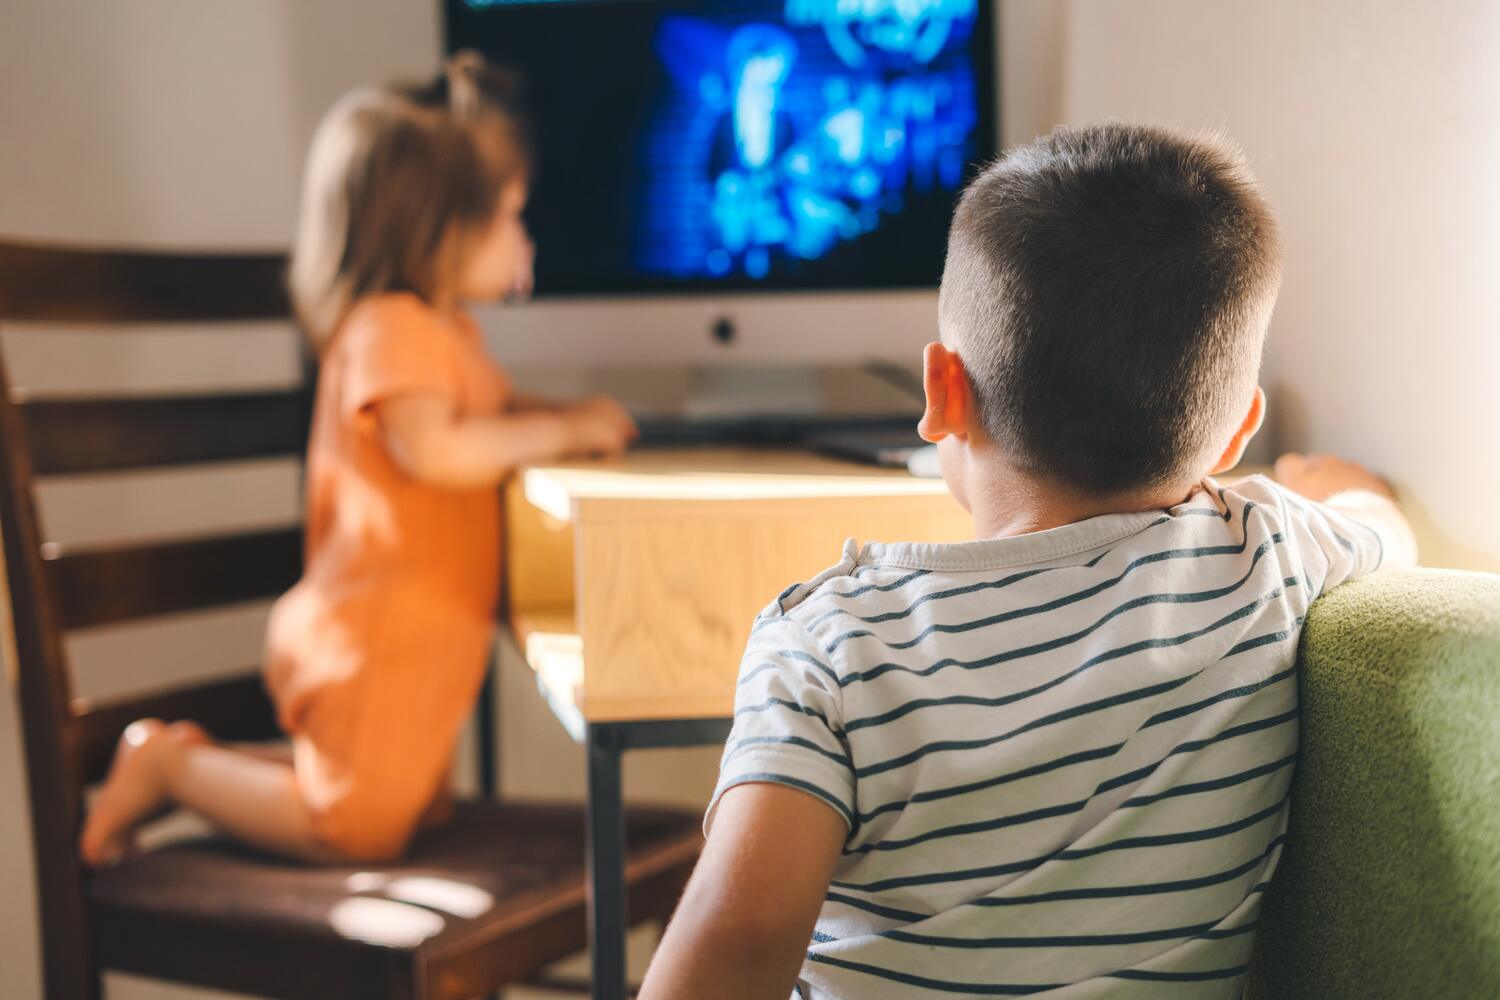 Setting limit on toddler's TV watching is necessary